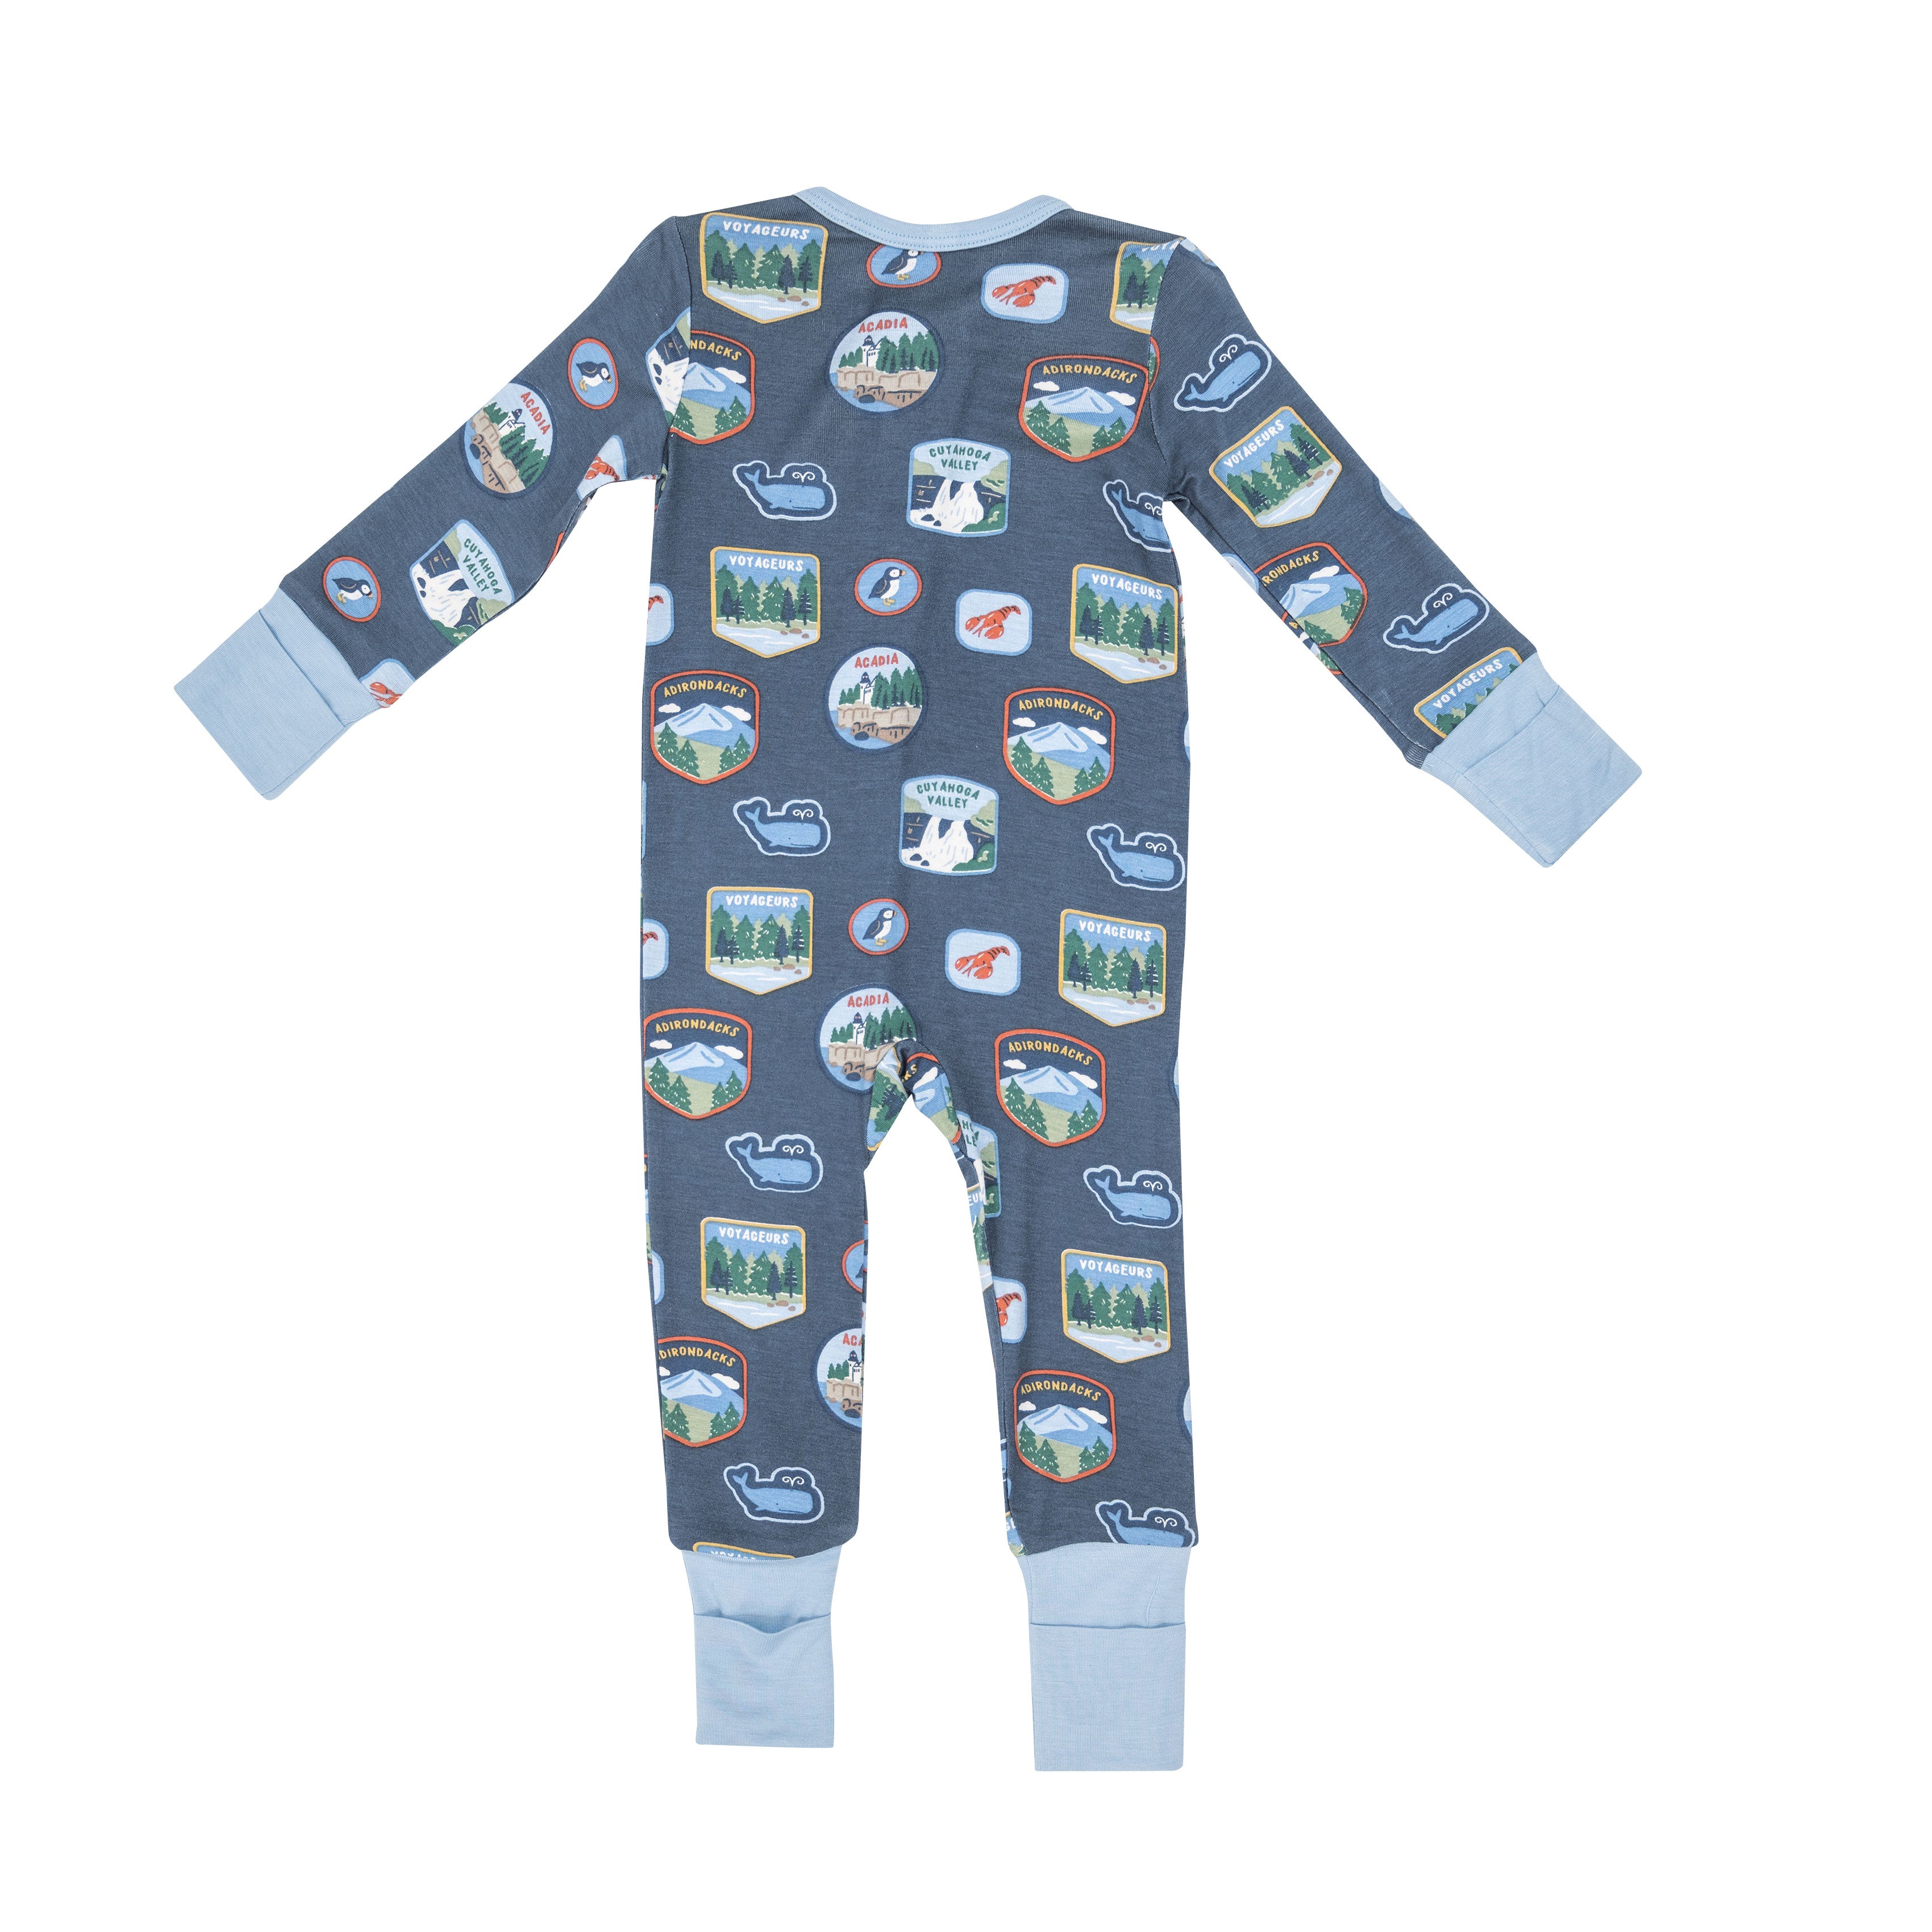 Blue romper with national park patches